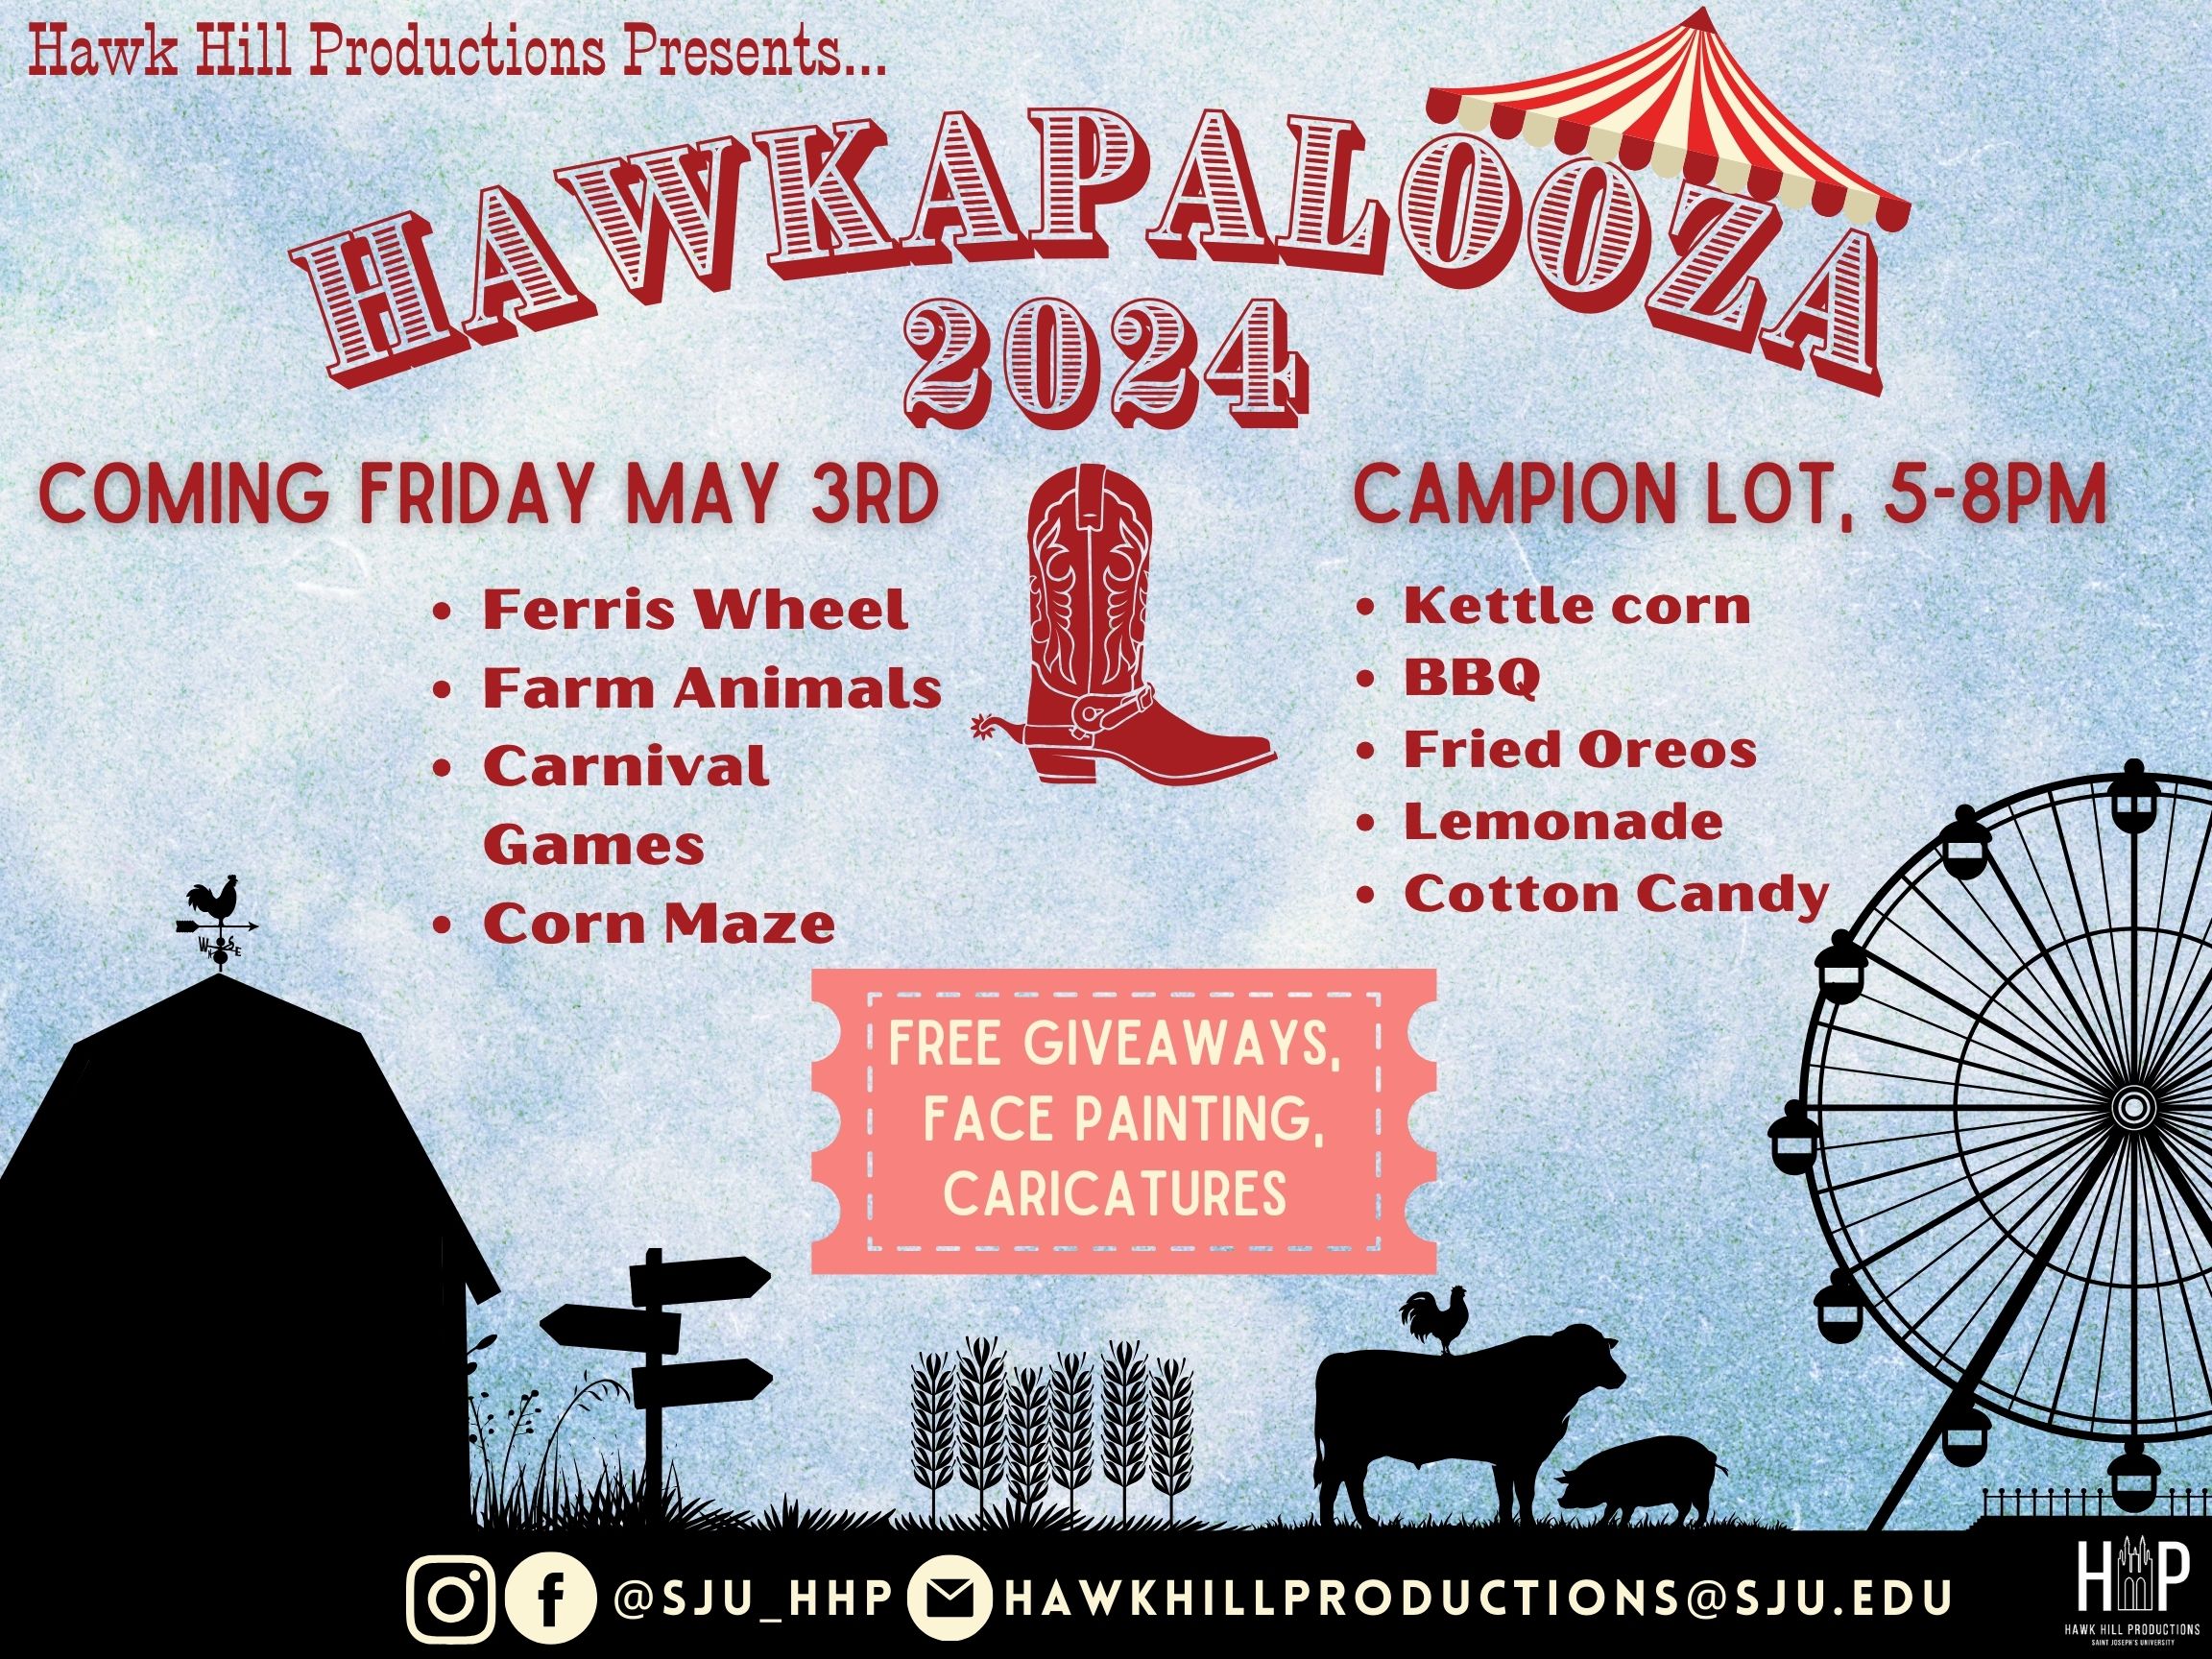 This is a flyer for an end of year event titled 'Hawkapalooza' which is a carnival themed event so there is a ferris wheel as well as siouhettes of a barn and farm animals, with a big carnival tent over the entire logo. 